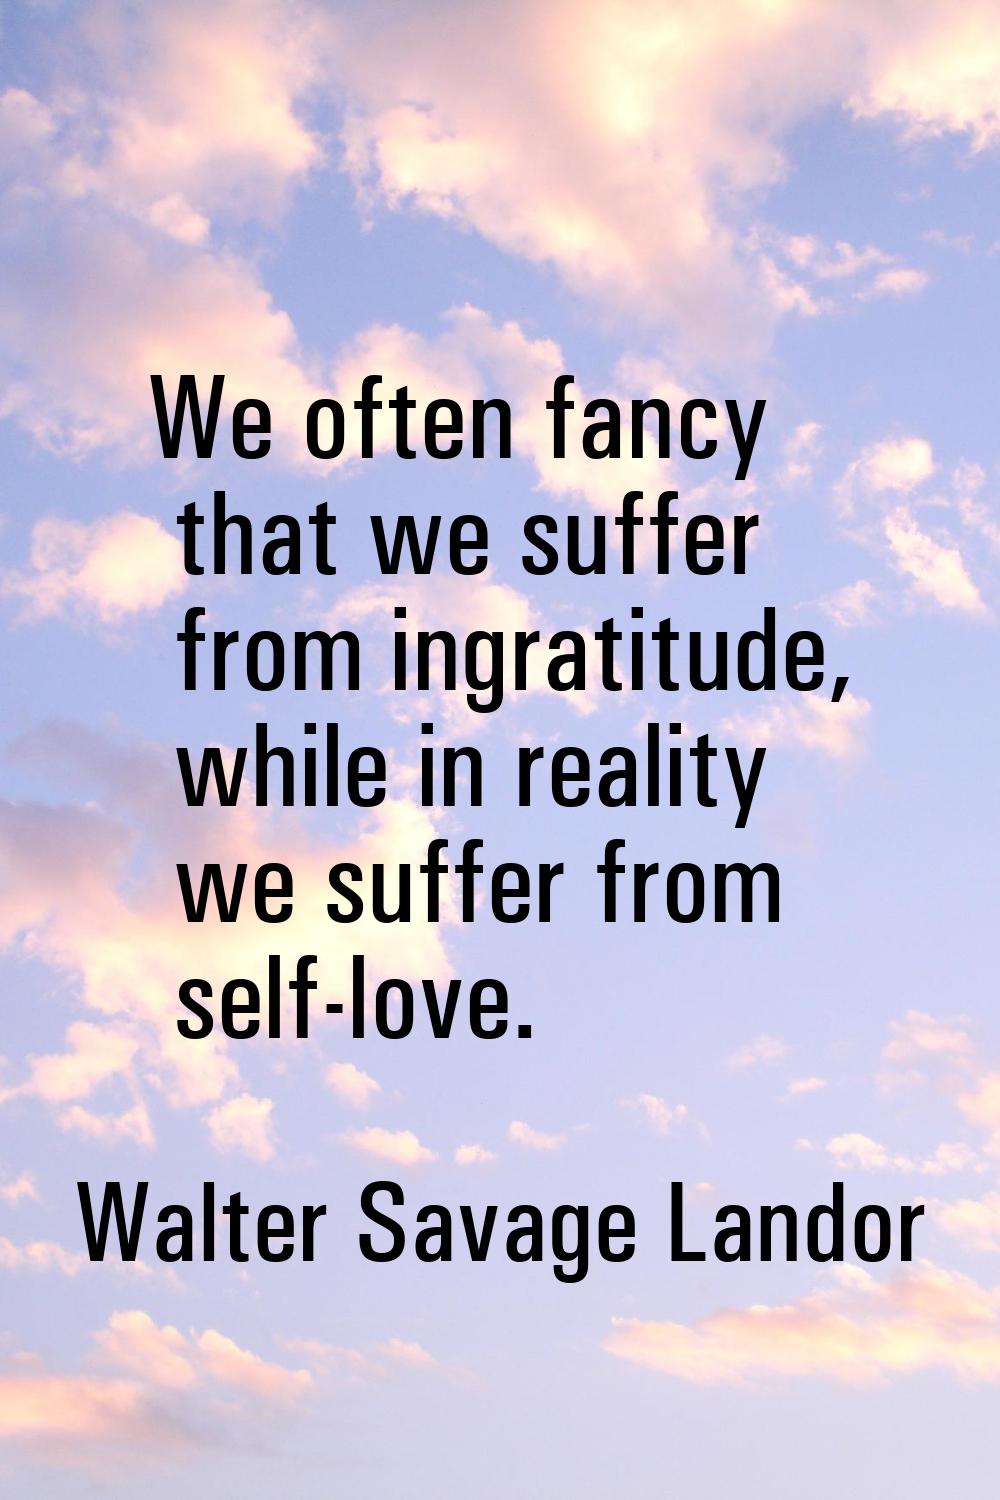 We often fancy that we suffer from ingratitude, while in reality we suffer from self-love.